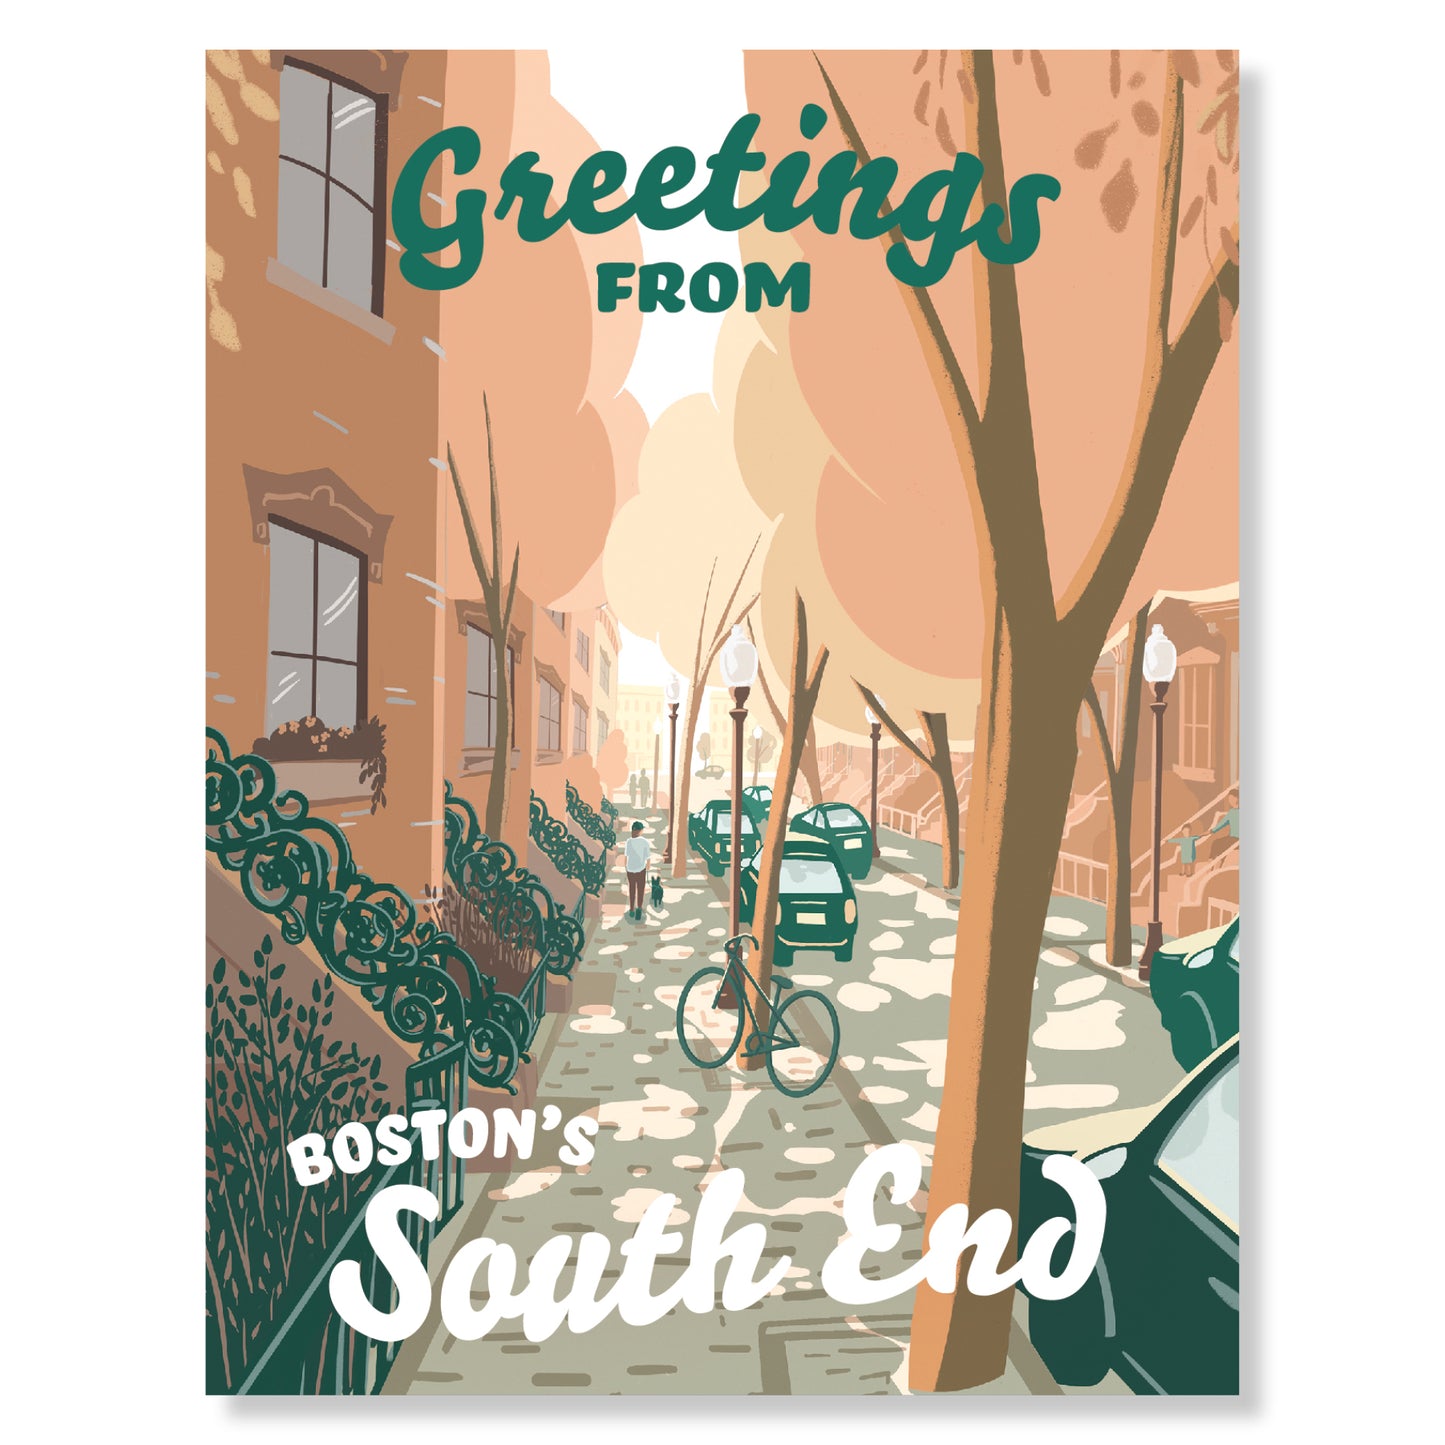 "Greetings from Boston's South End" Greeting Card